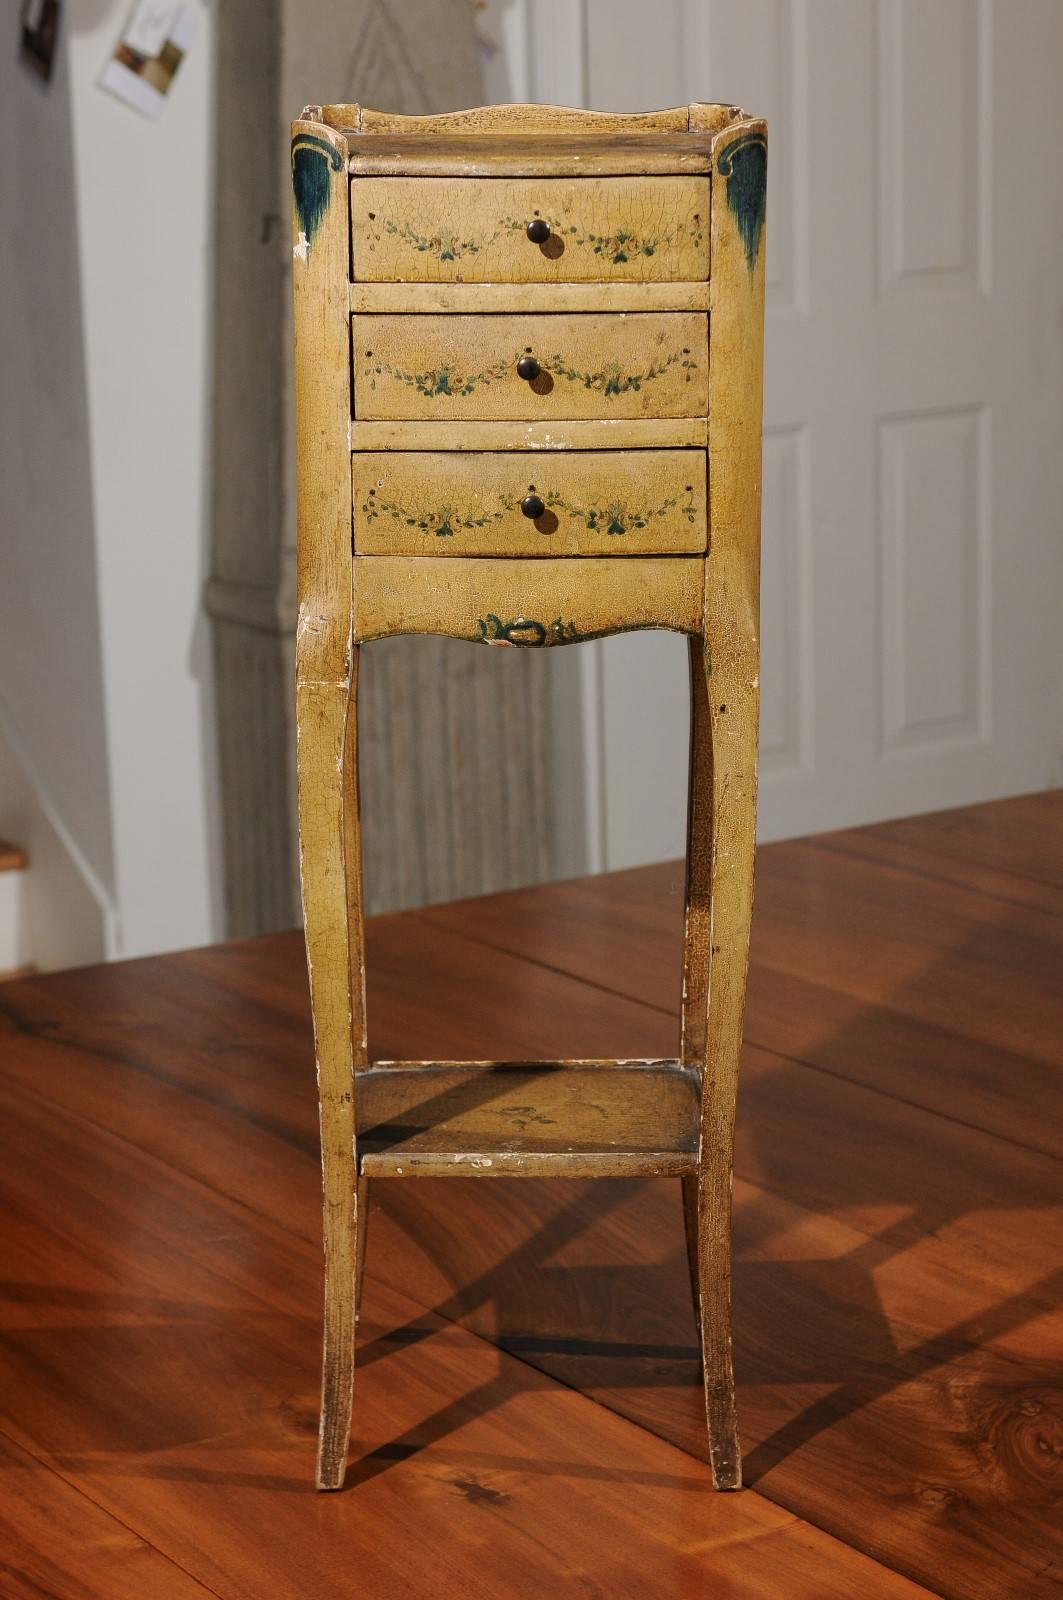 Italian 19th Century Nightstand Table with Painted Decor, Drawers and Low Shelf 2